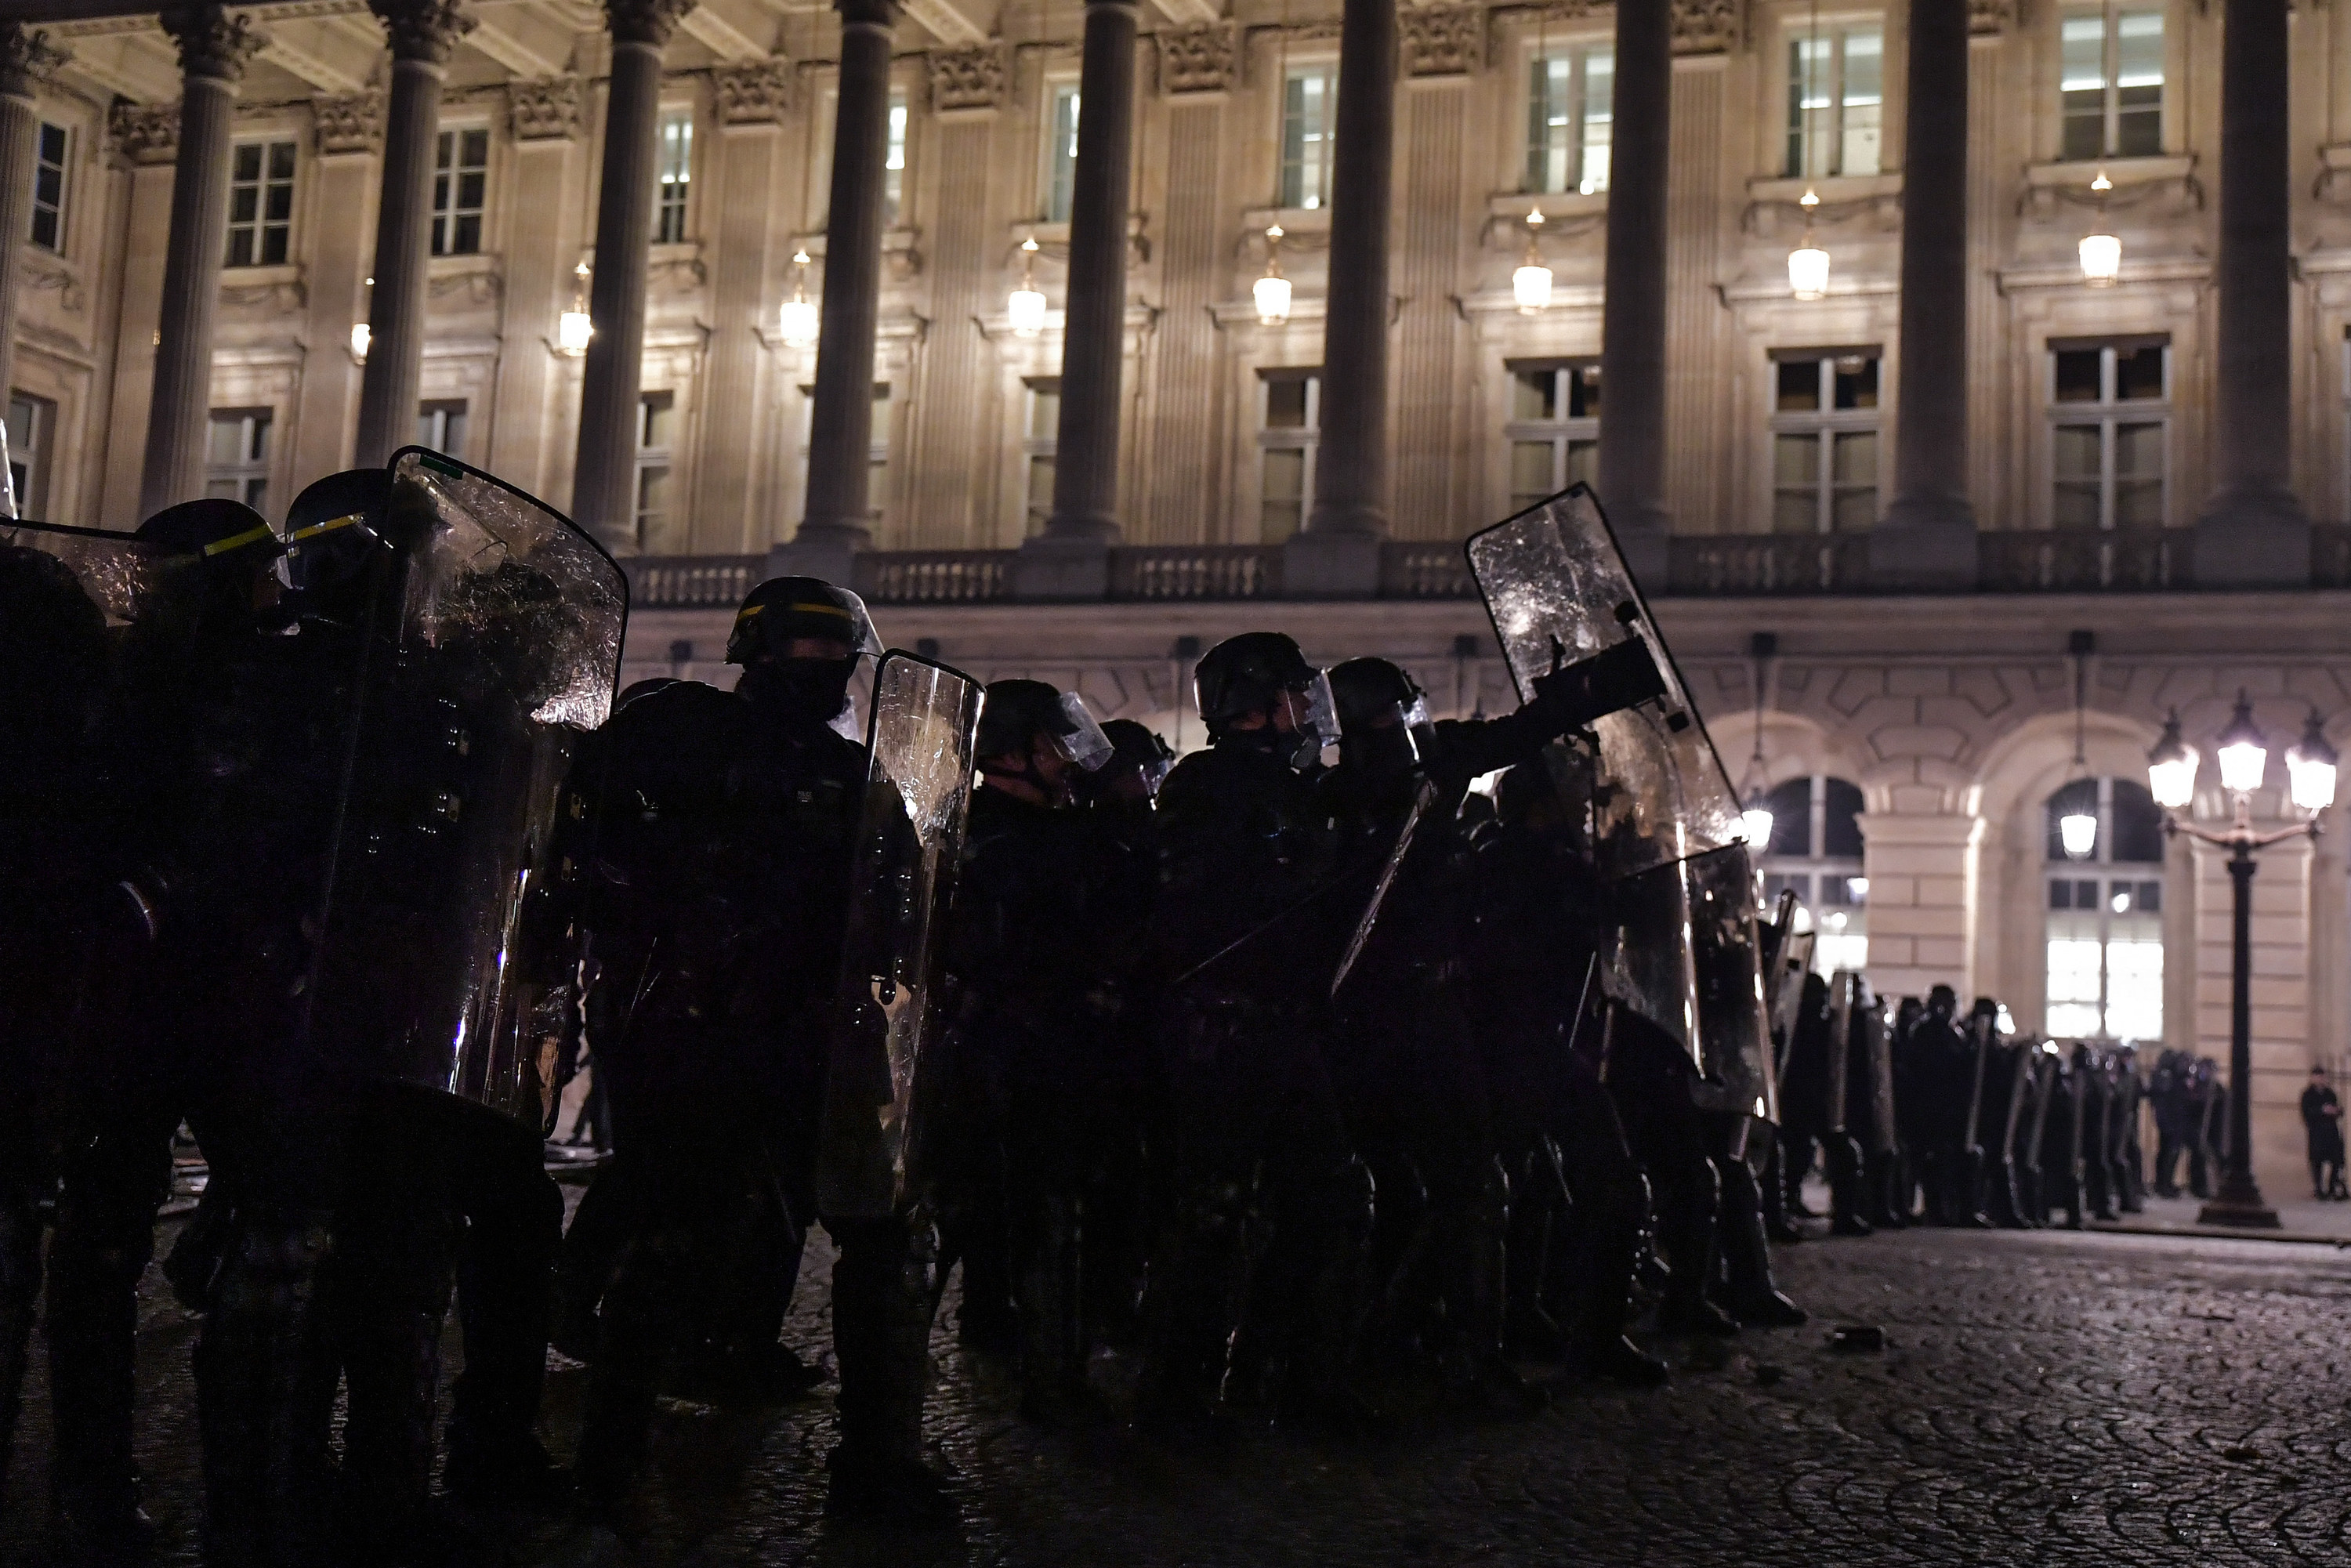 at night, police in riot gear stand in a line holding shields